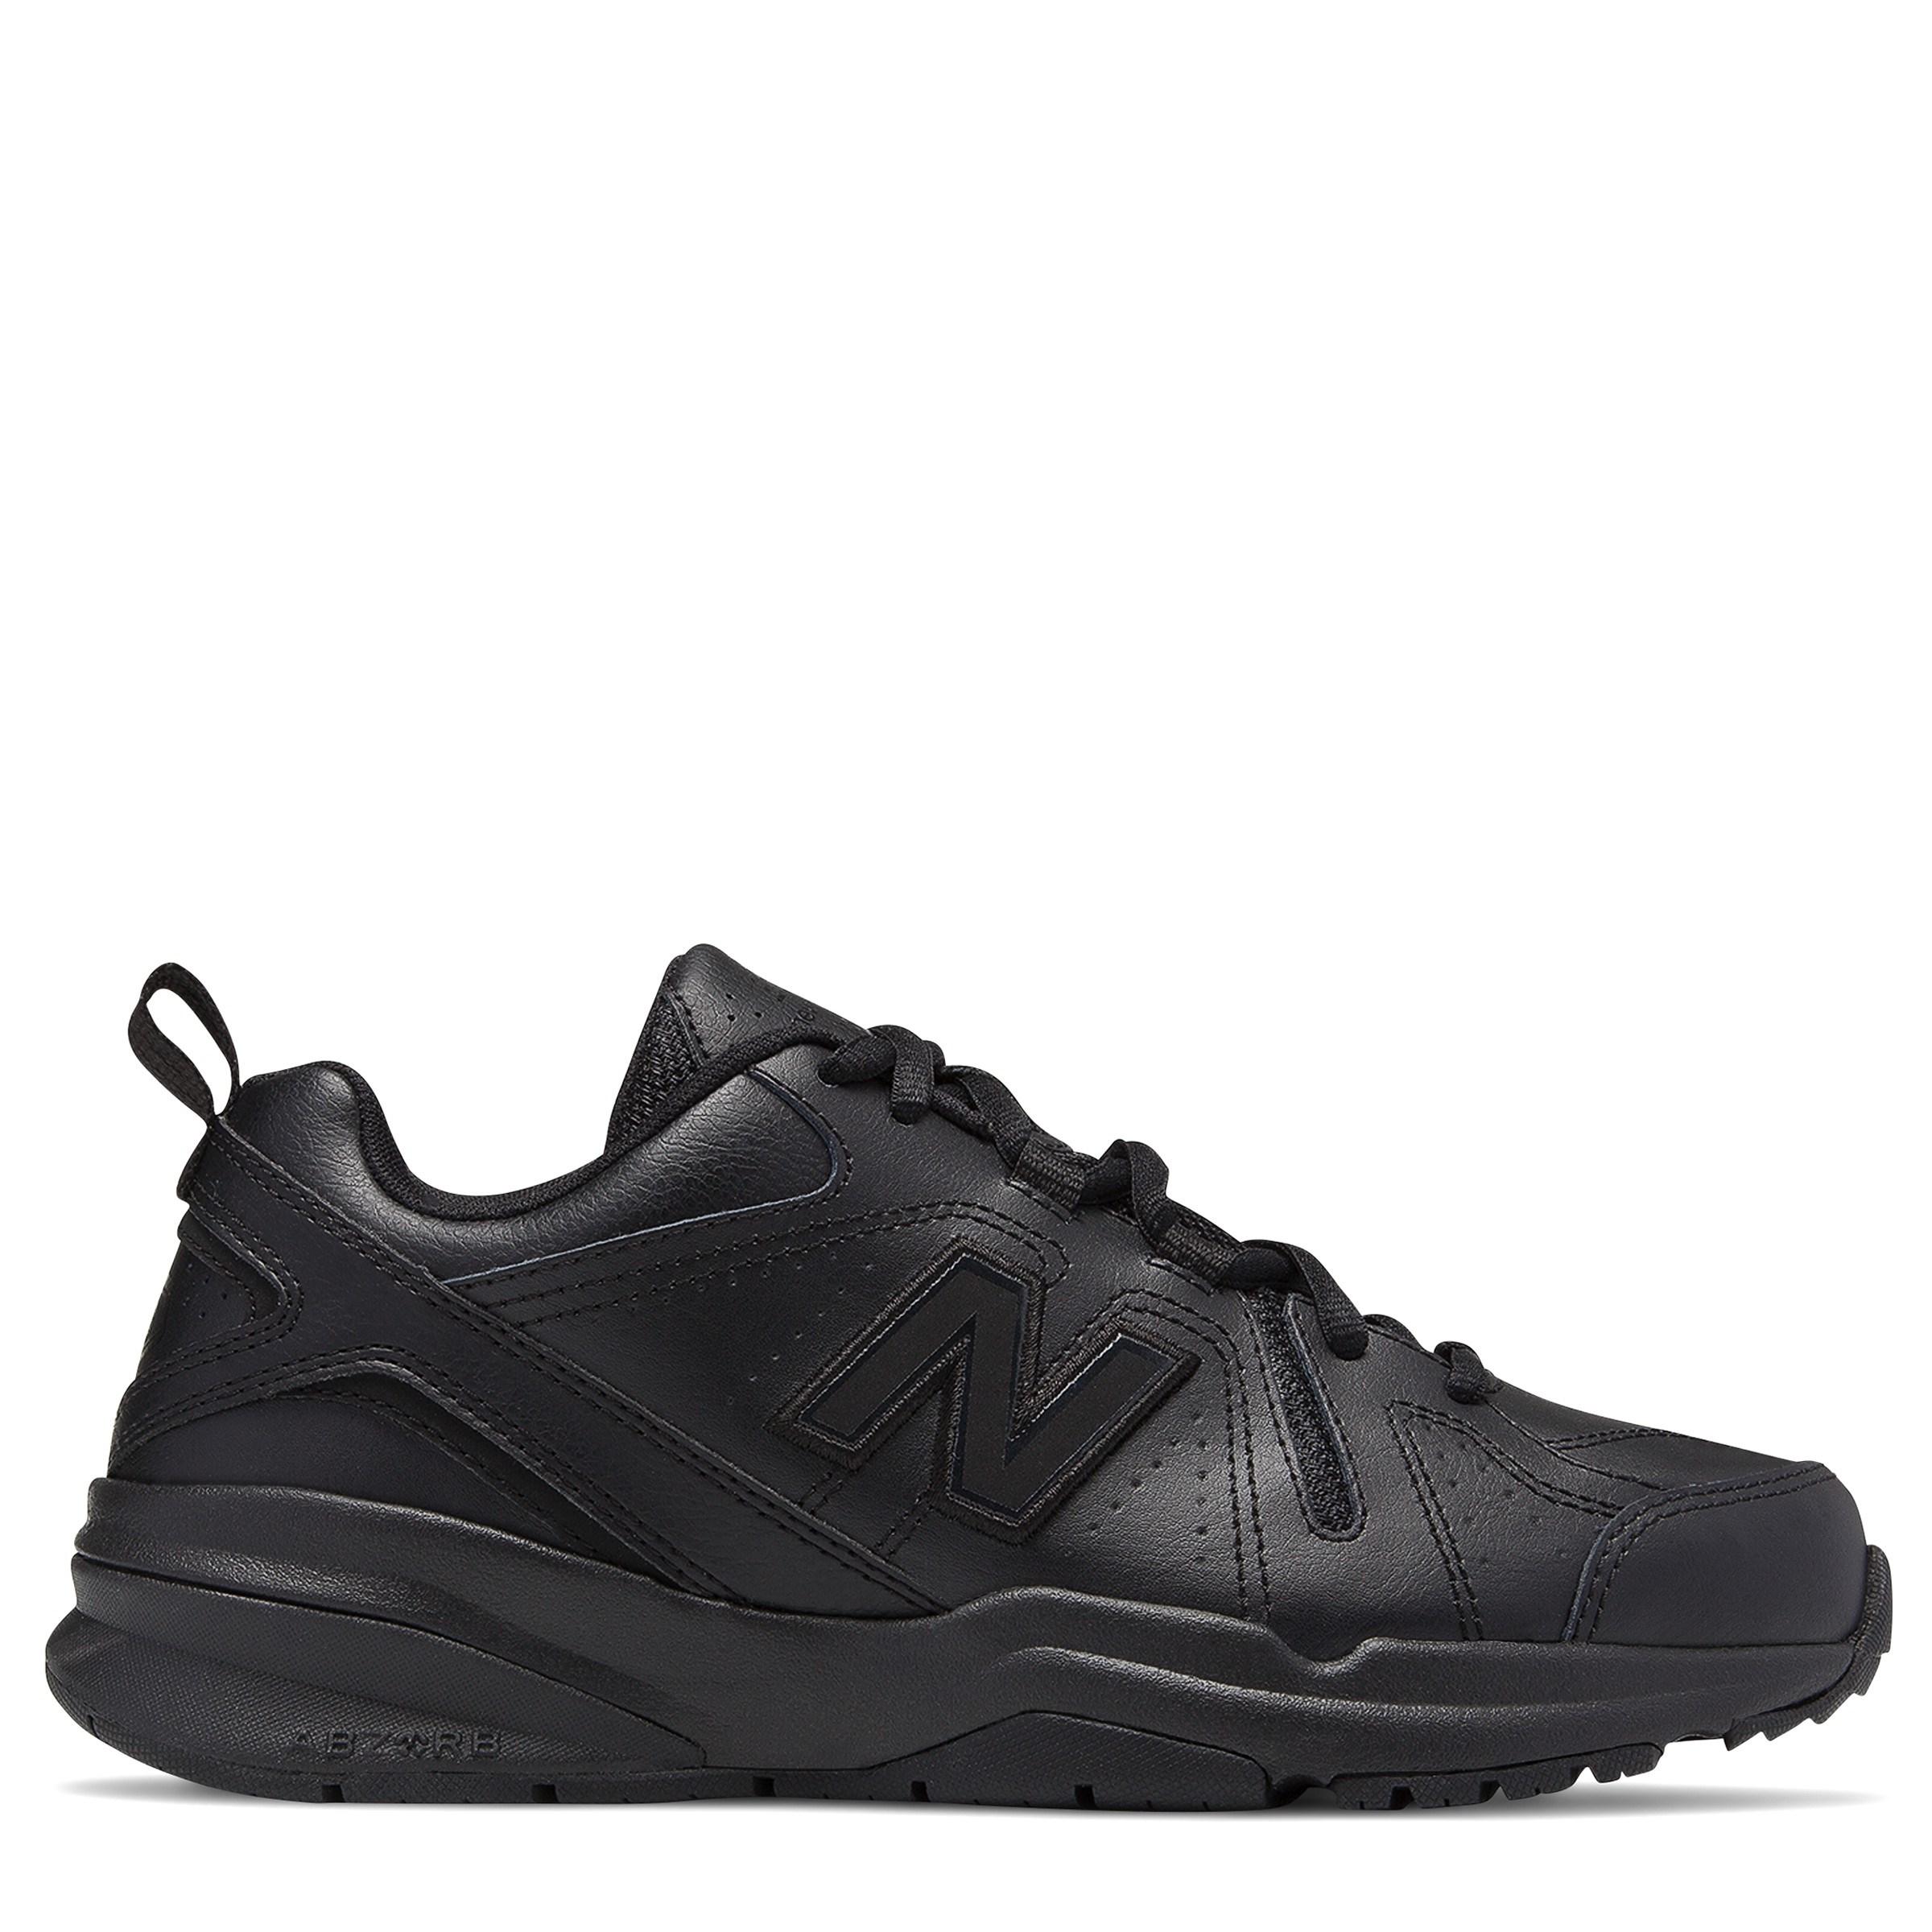 New Balance Leather 608v5 Trainer Sneakers in Black - Lyst